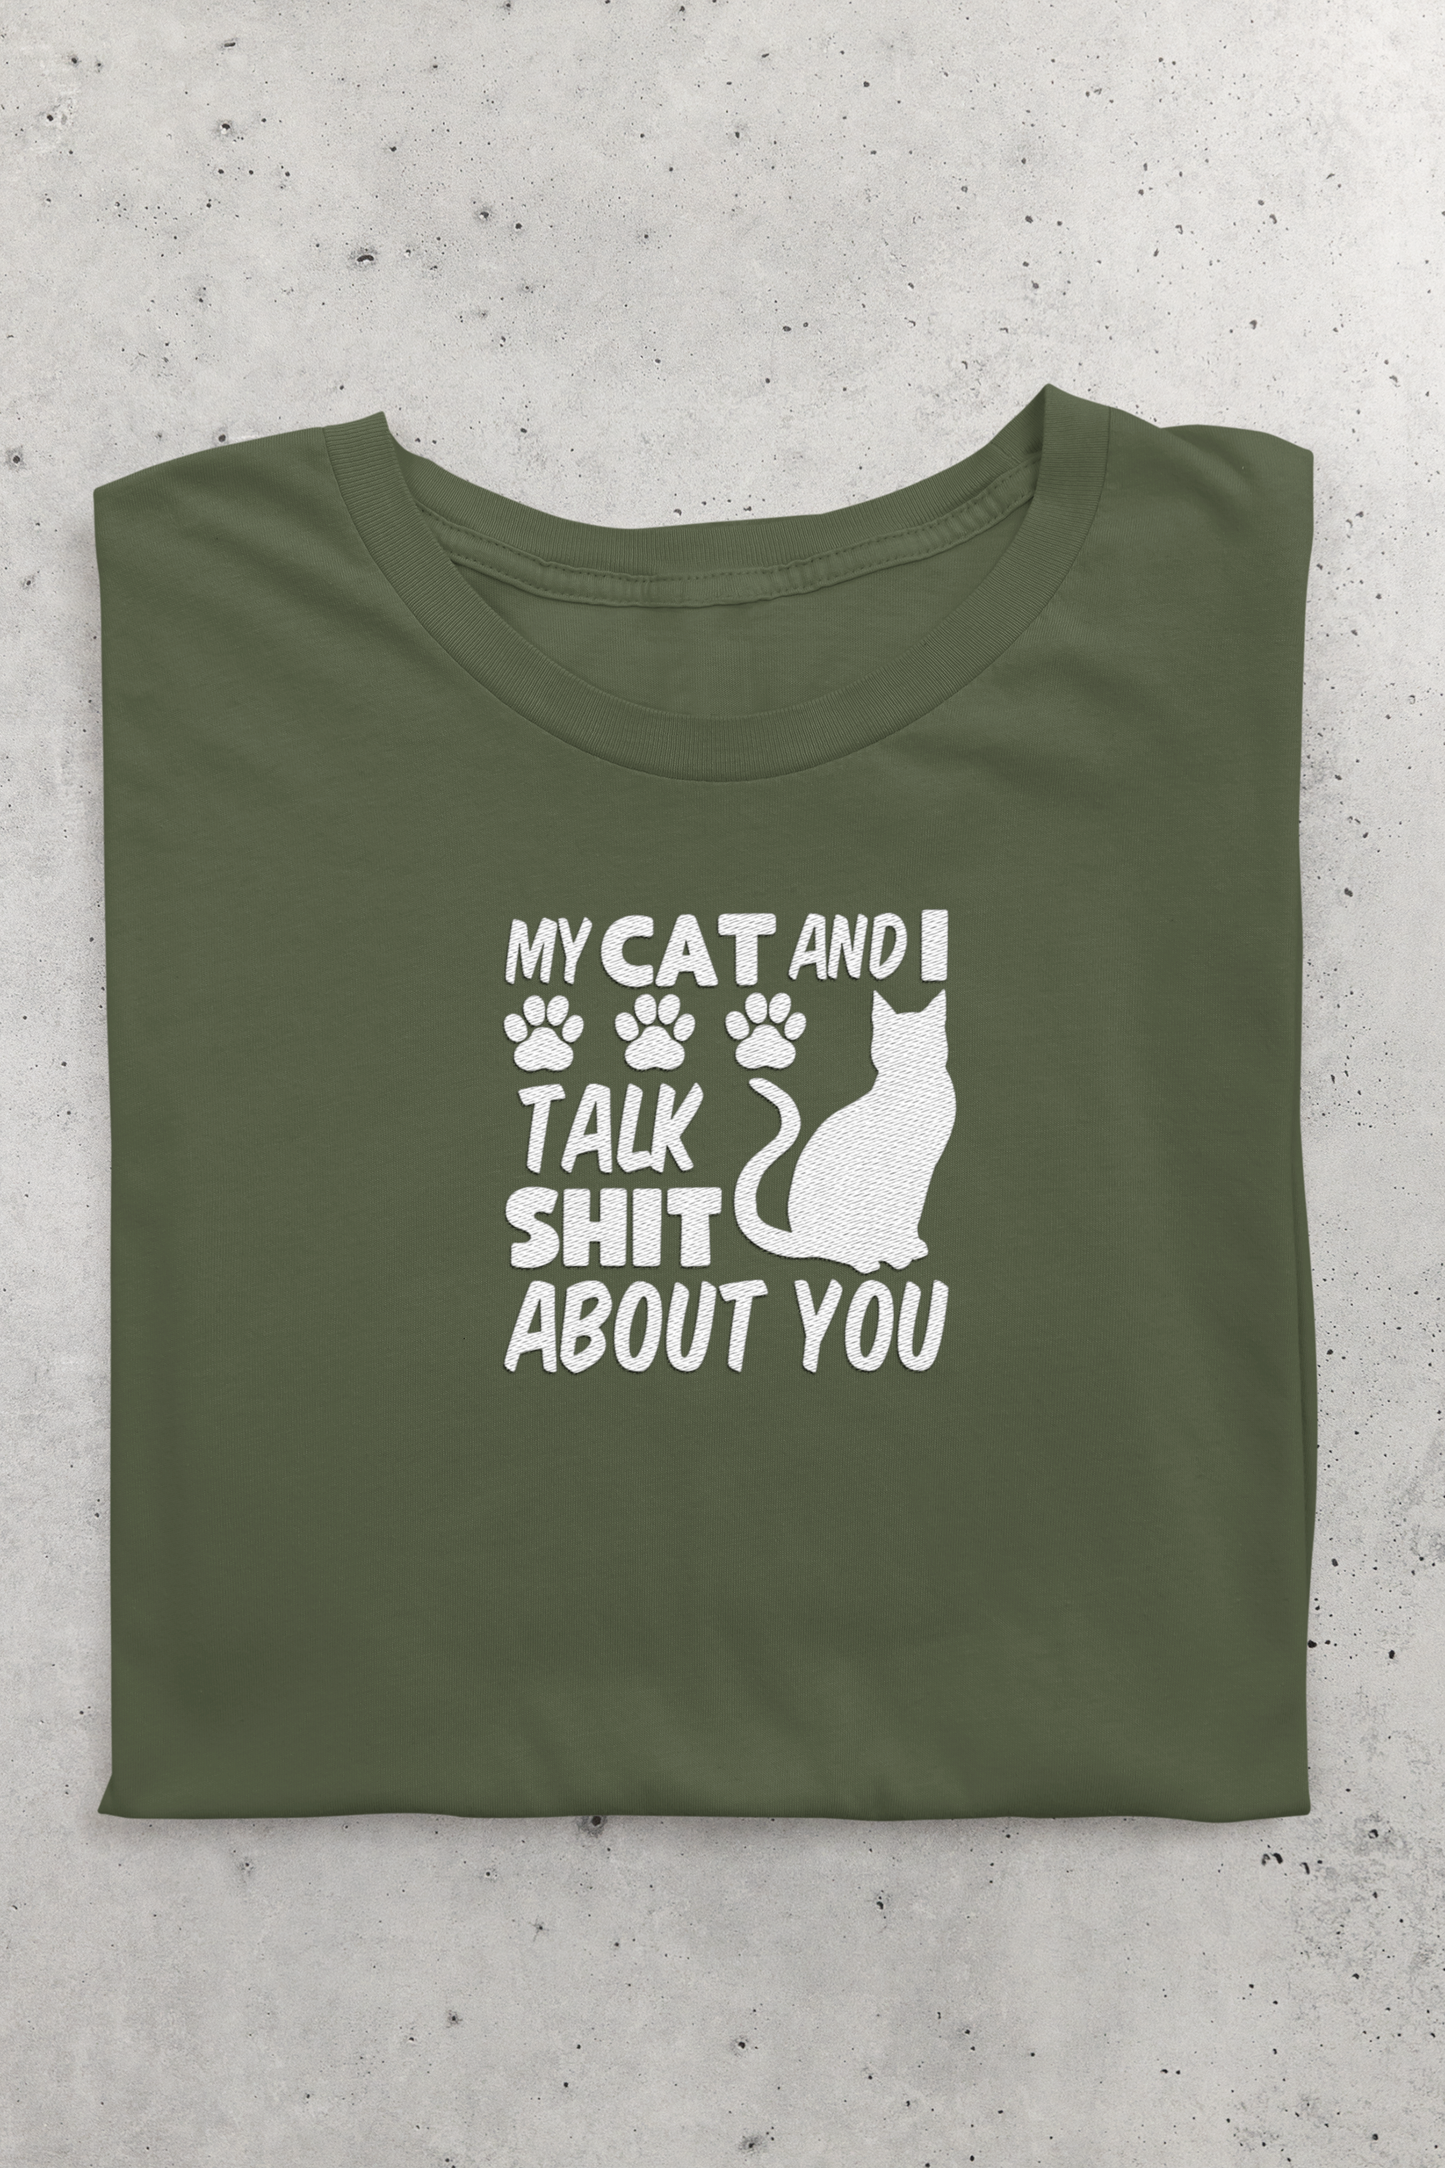 My Cat and I Talk Sh*t About You crew neck